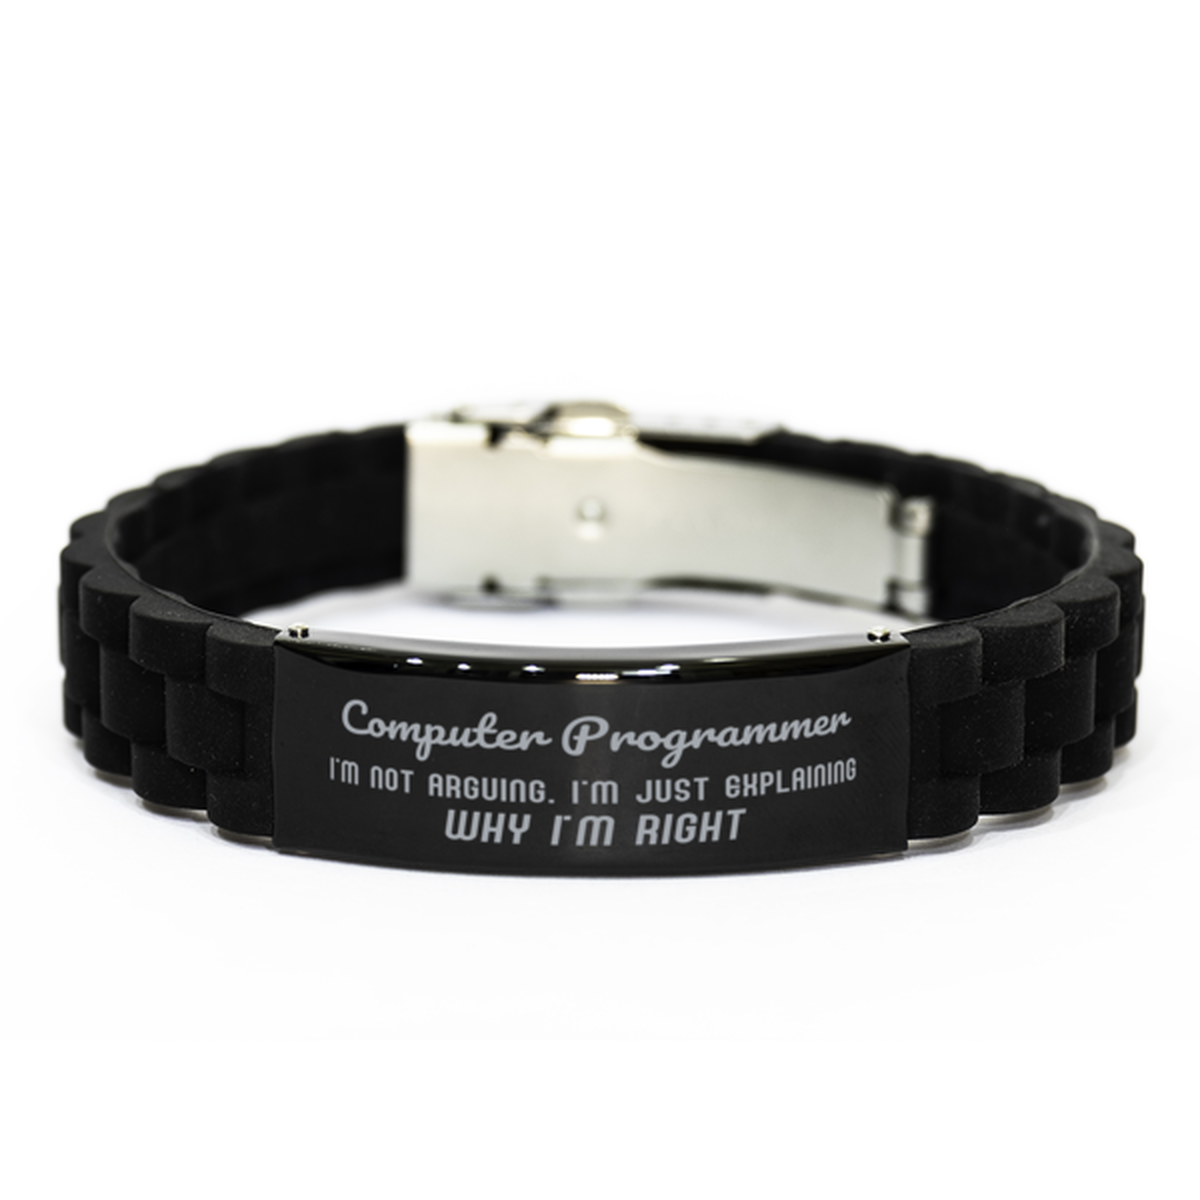 Computer Programmer I'm not Arguing. I'm Just Explaining Why I'm RIGHT Black Glidelock Clasp Bracelet, Funny Saying Quote Computer Programmer Gifts For Computer Programmer Graduation Birthday Christmas Gifts for Men Women Coworker